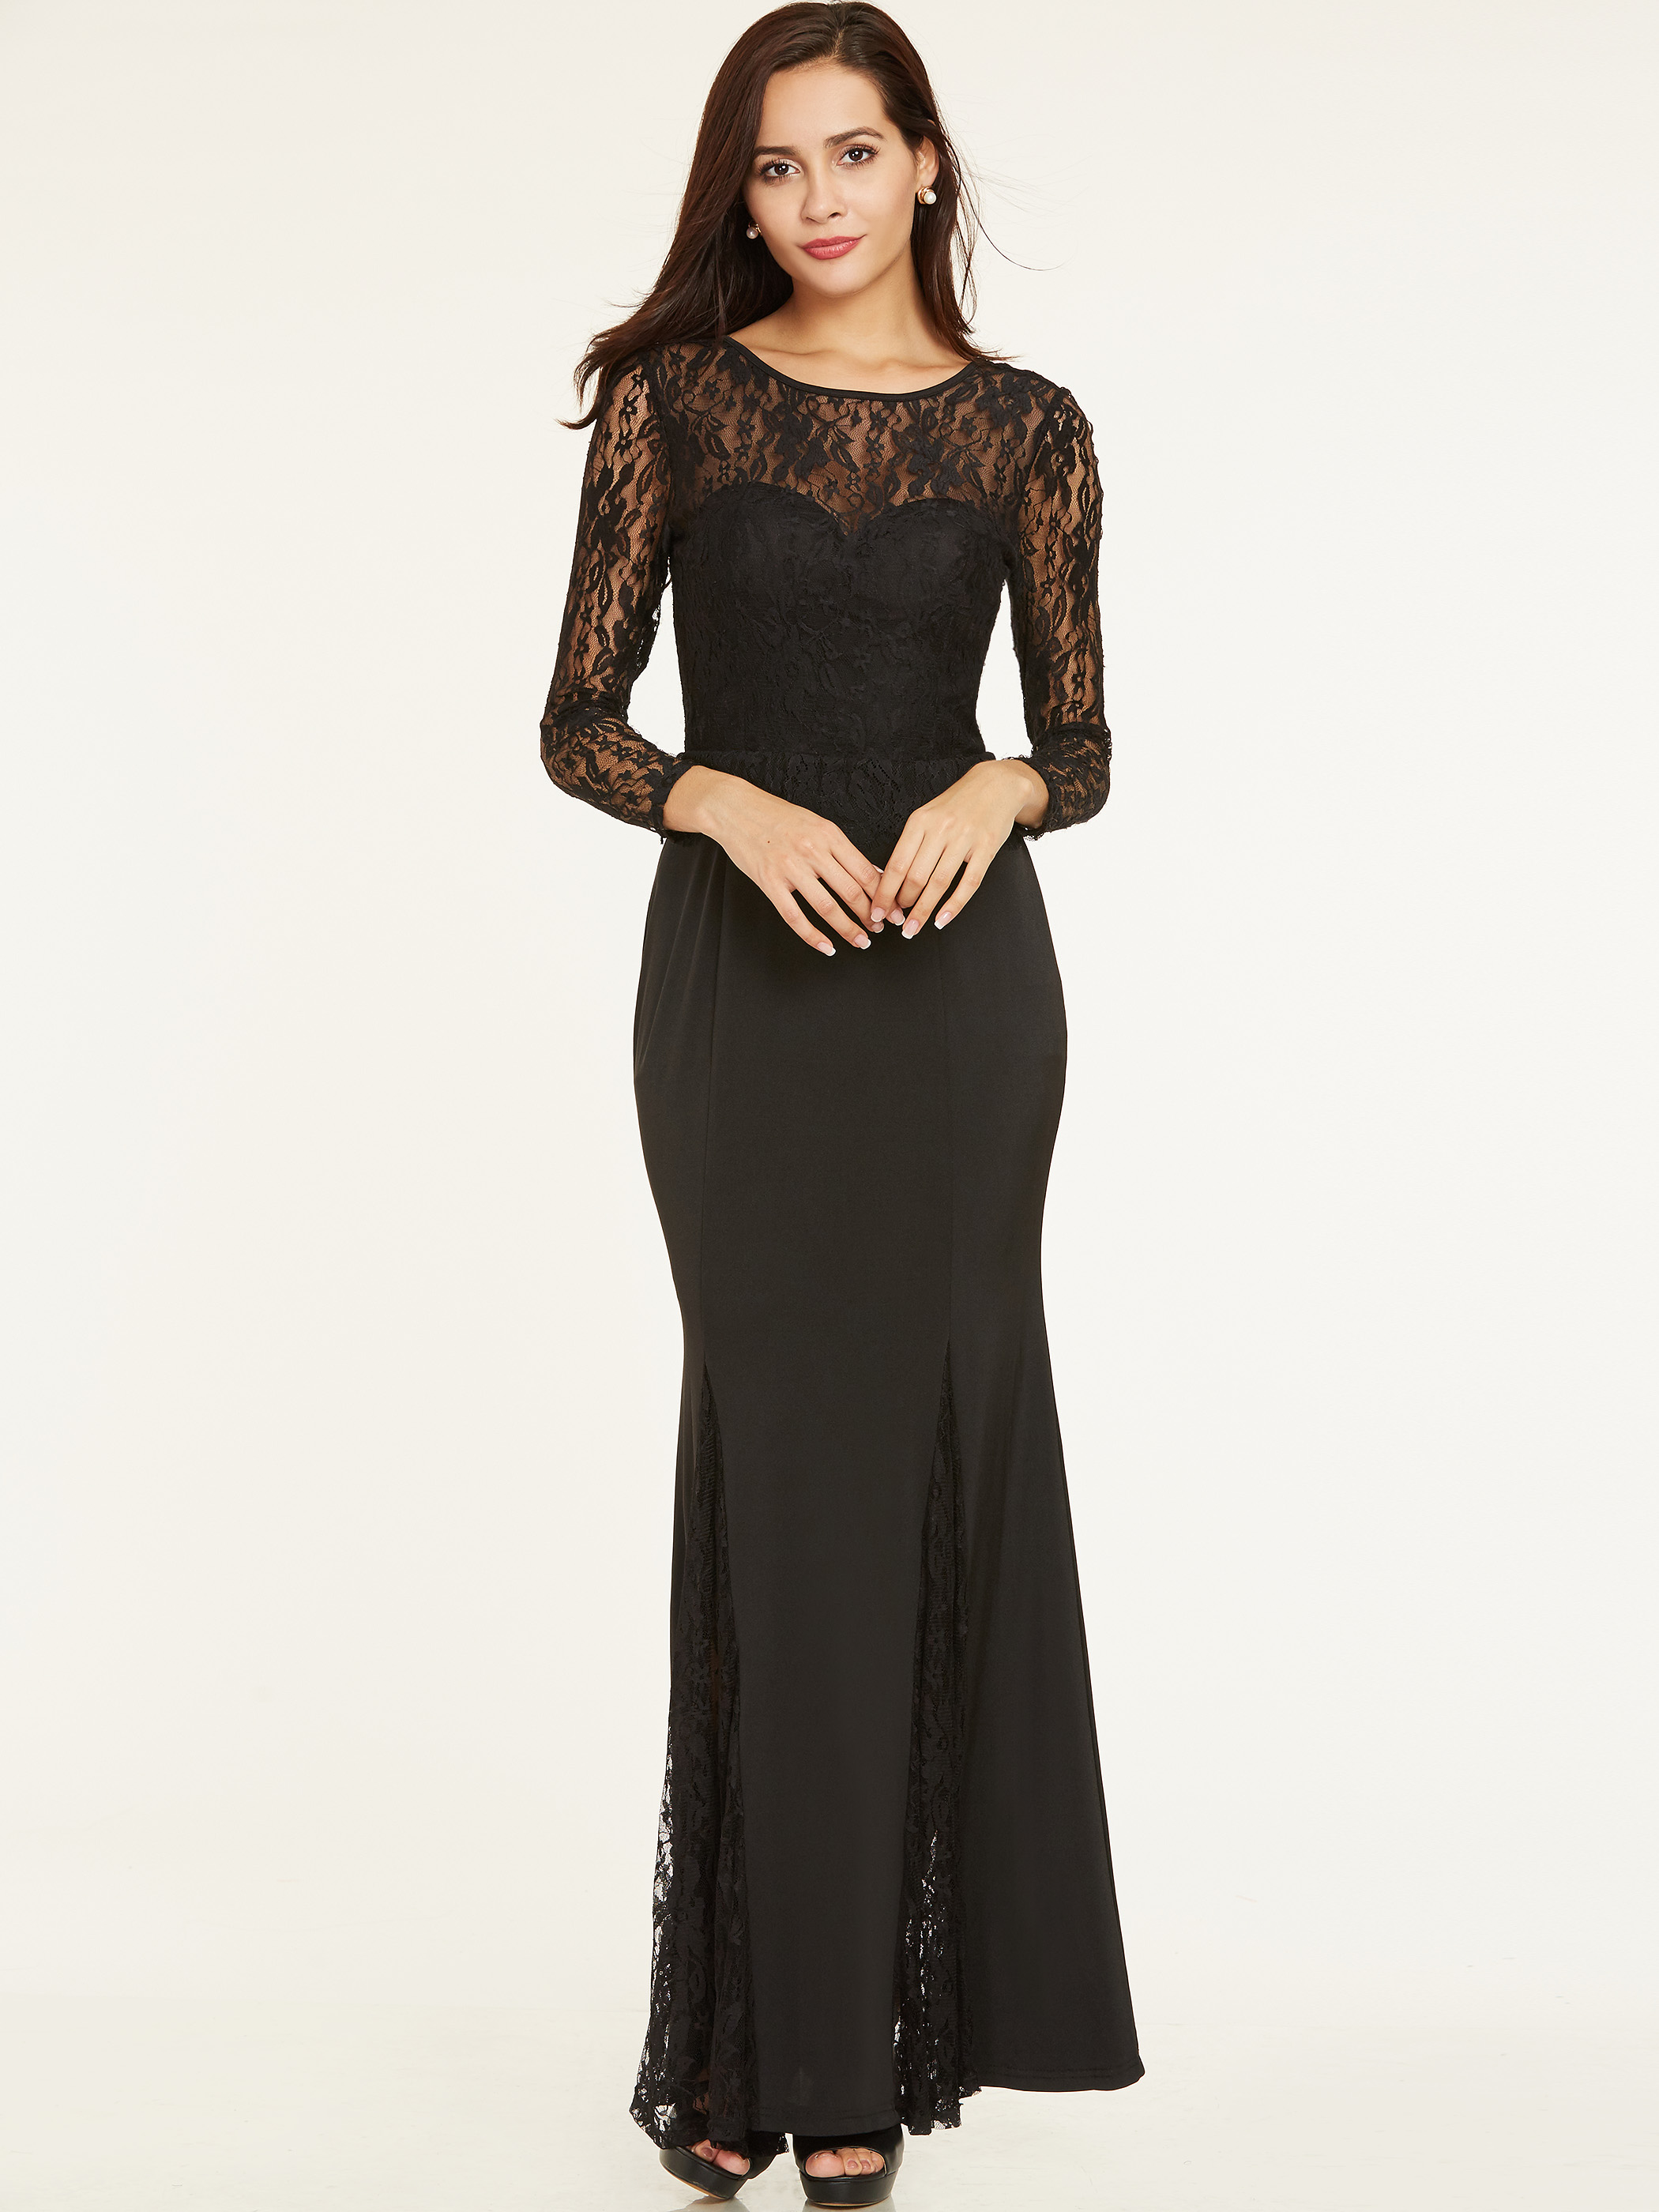 Ericdress Scoop Neck Backless Lace Evening Dress